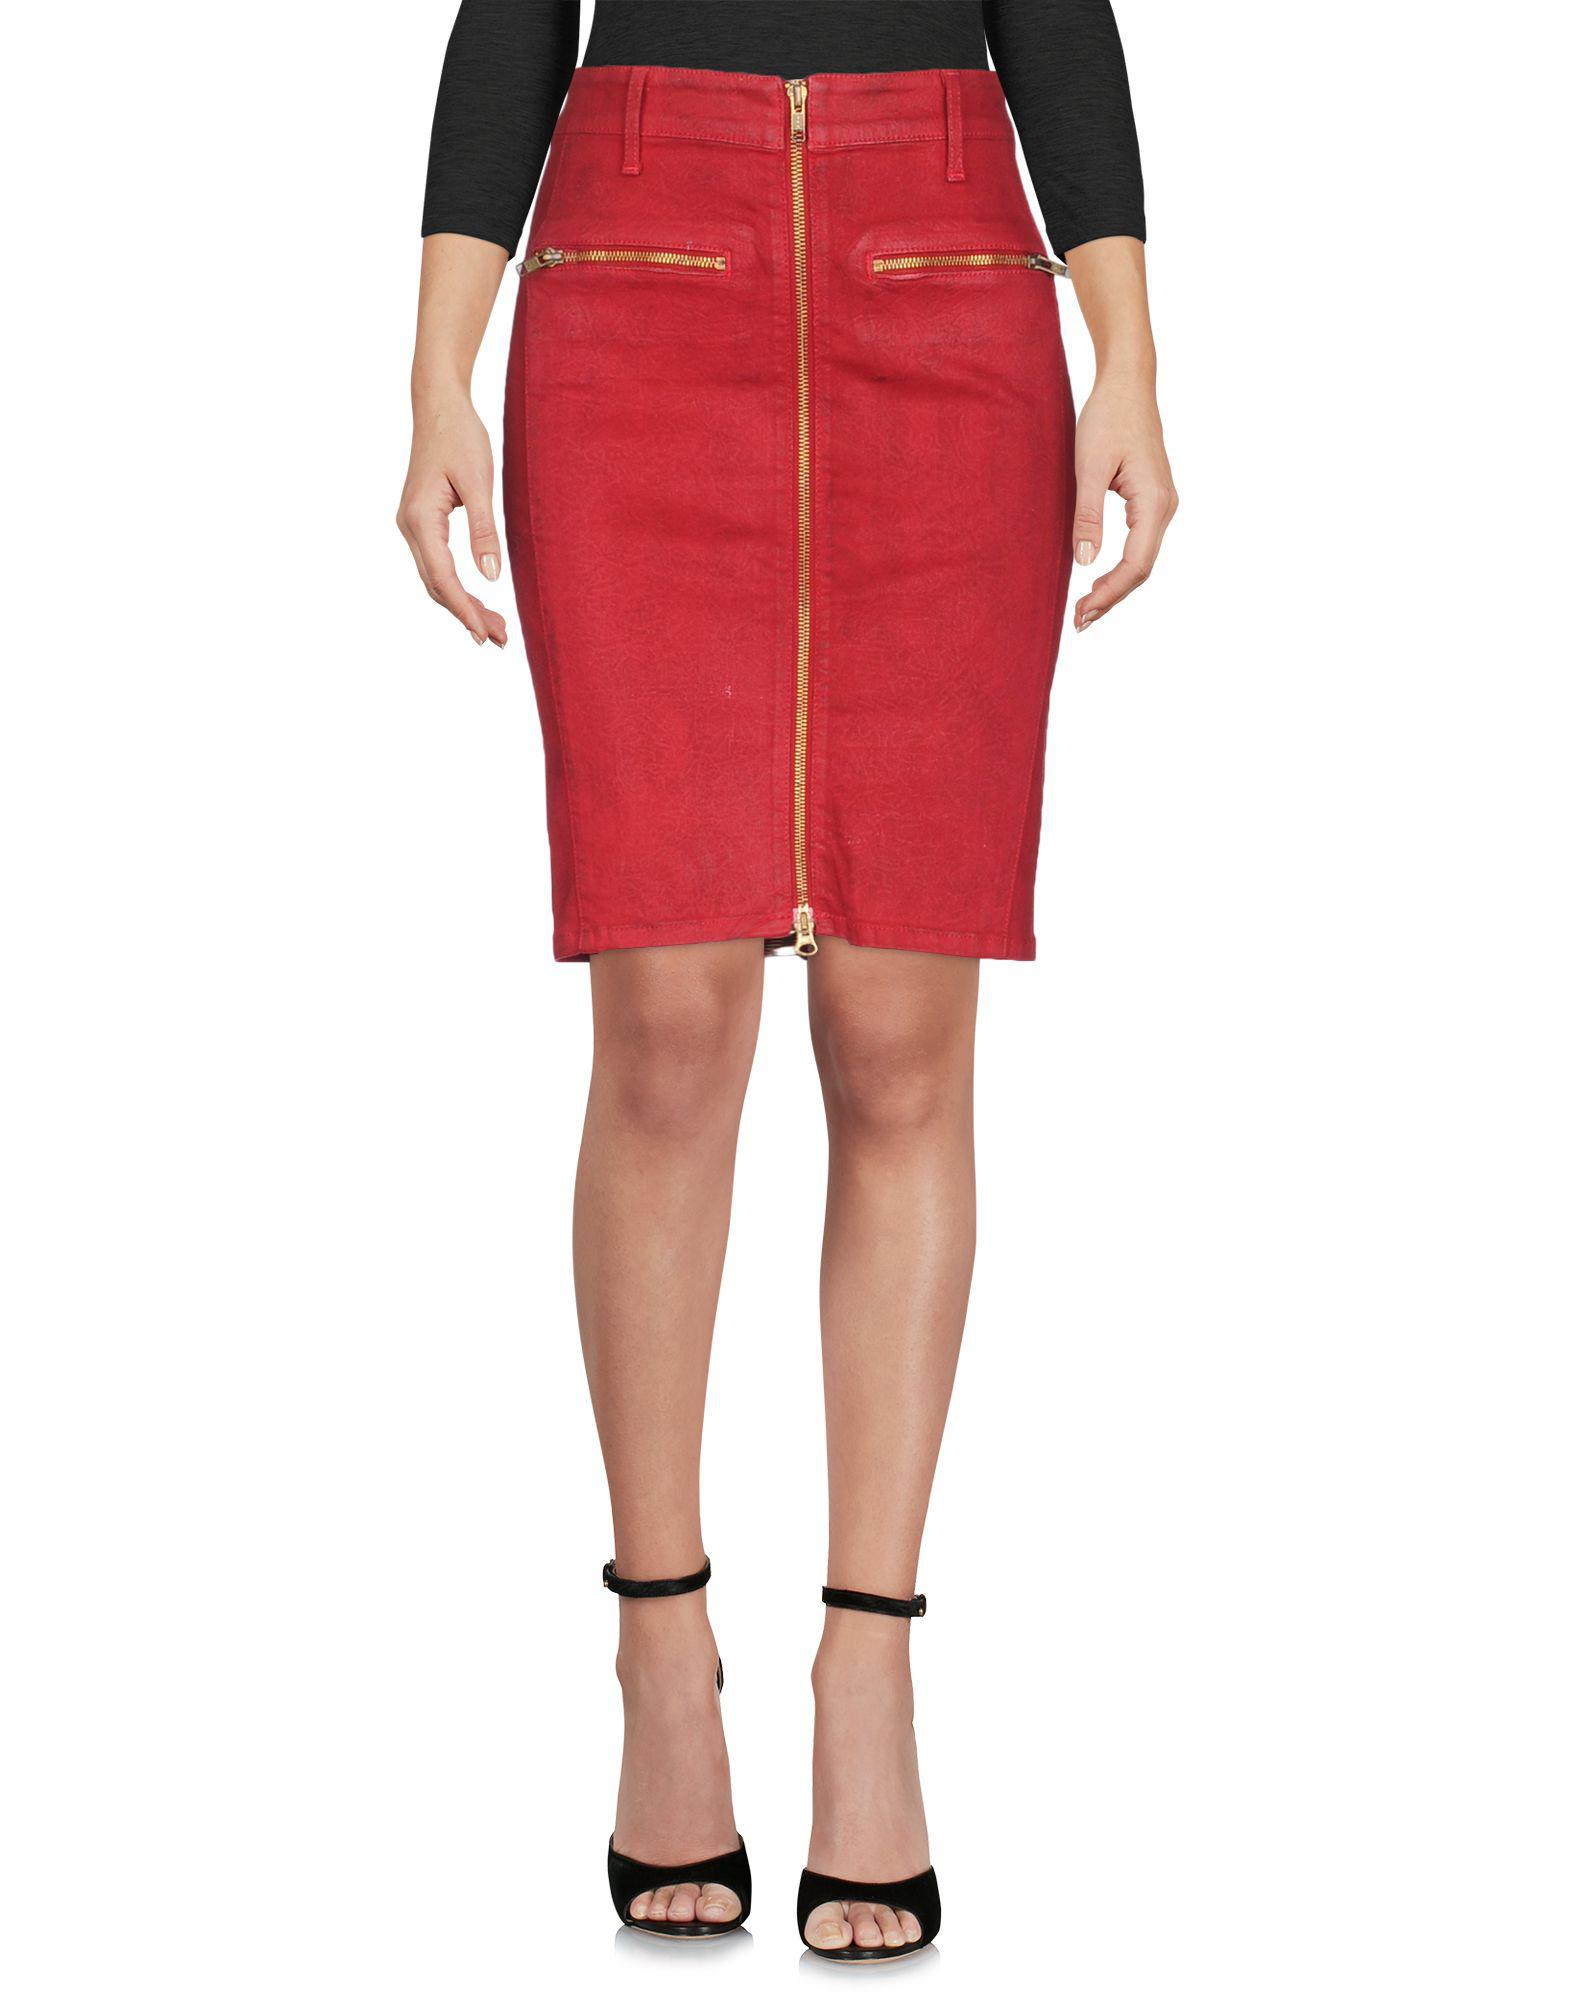 Guess Denim Skirts in Red - Lyst